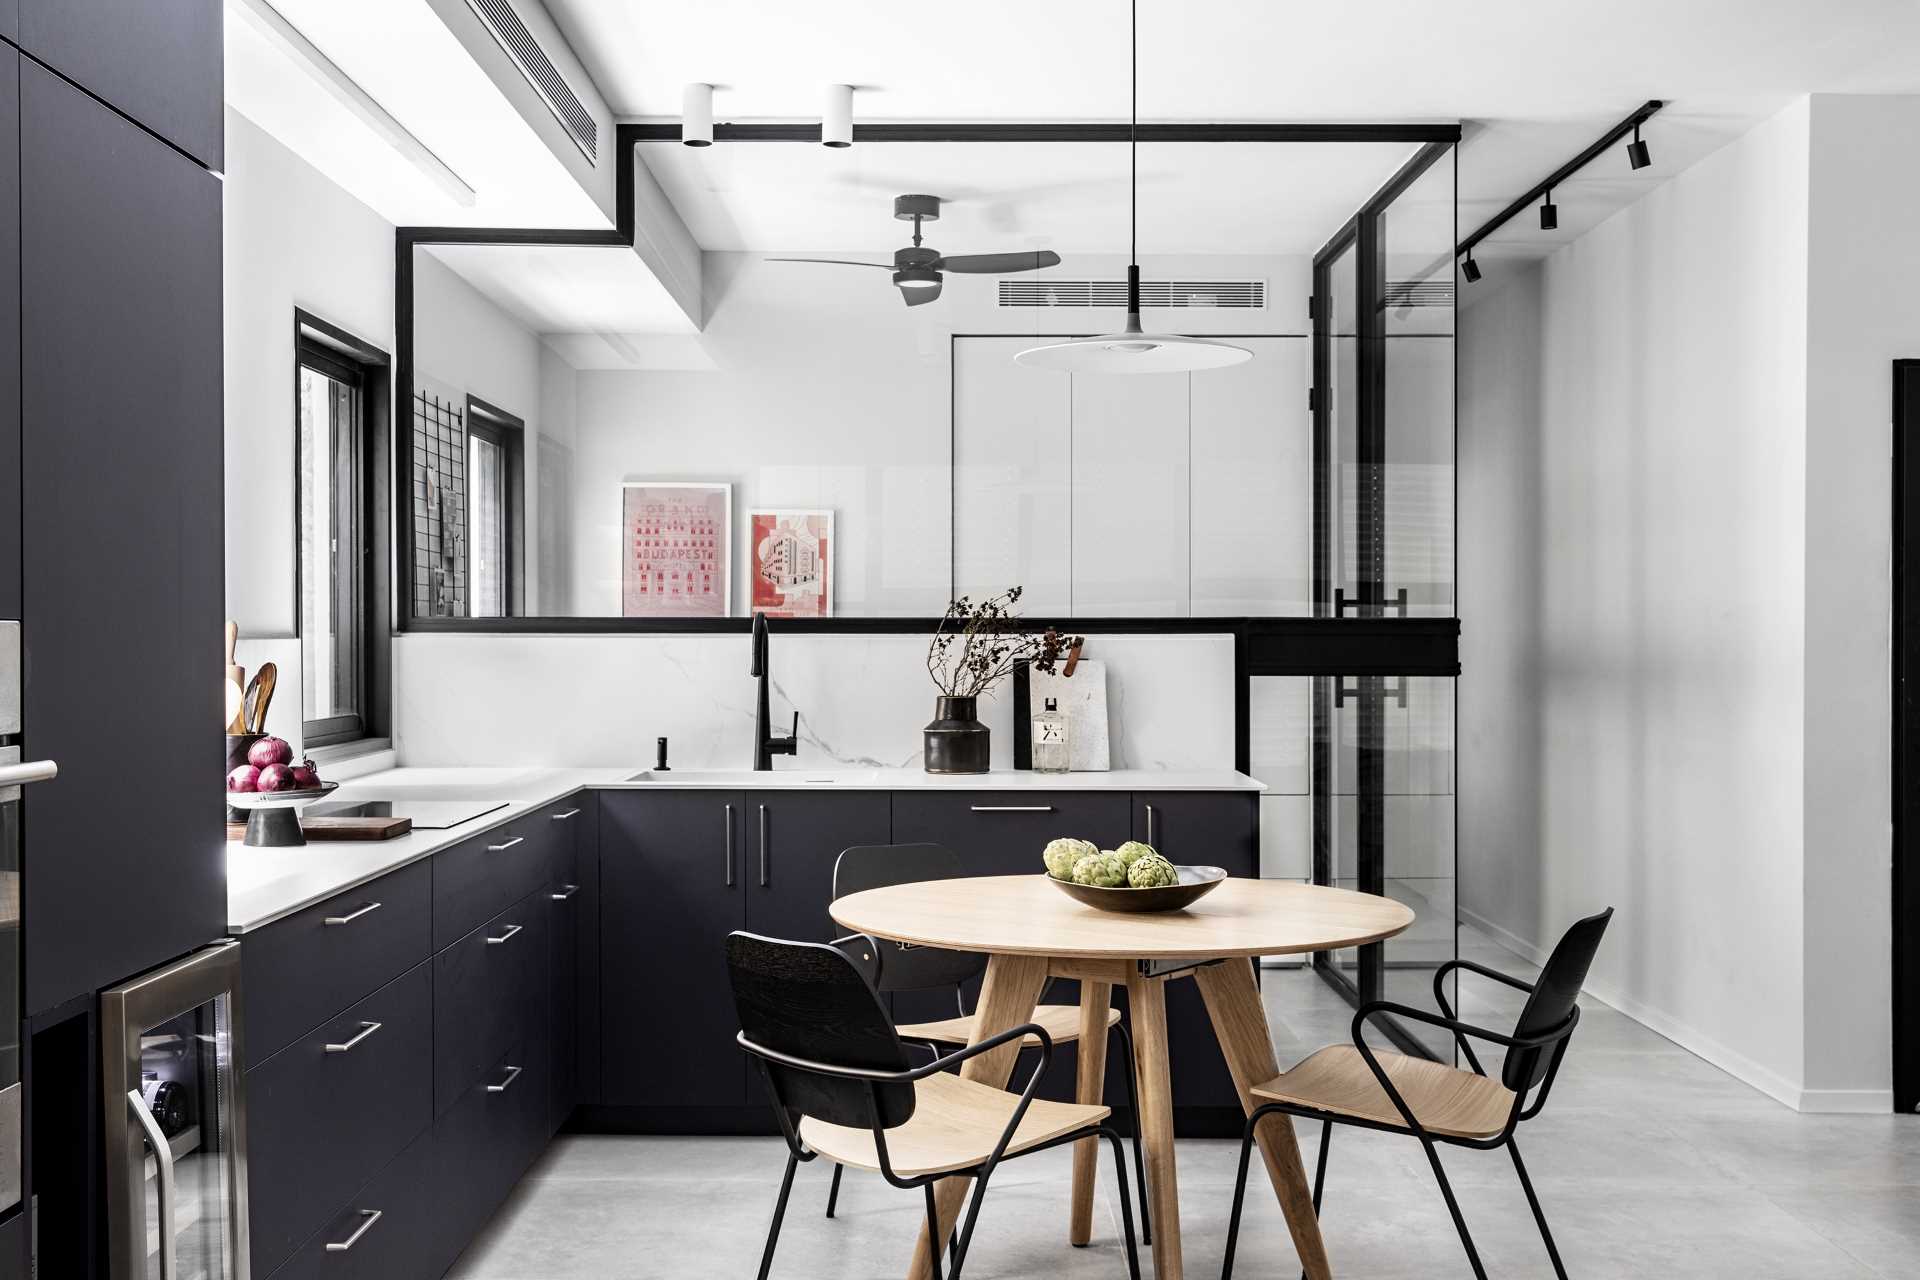 Located within the communal space, the home office is tucked away behind glass walls, allowing it to be separated from the open plan living room / kitchen / dining room, but at the same time, still being connected by sight.